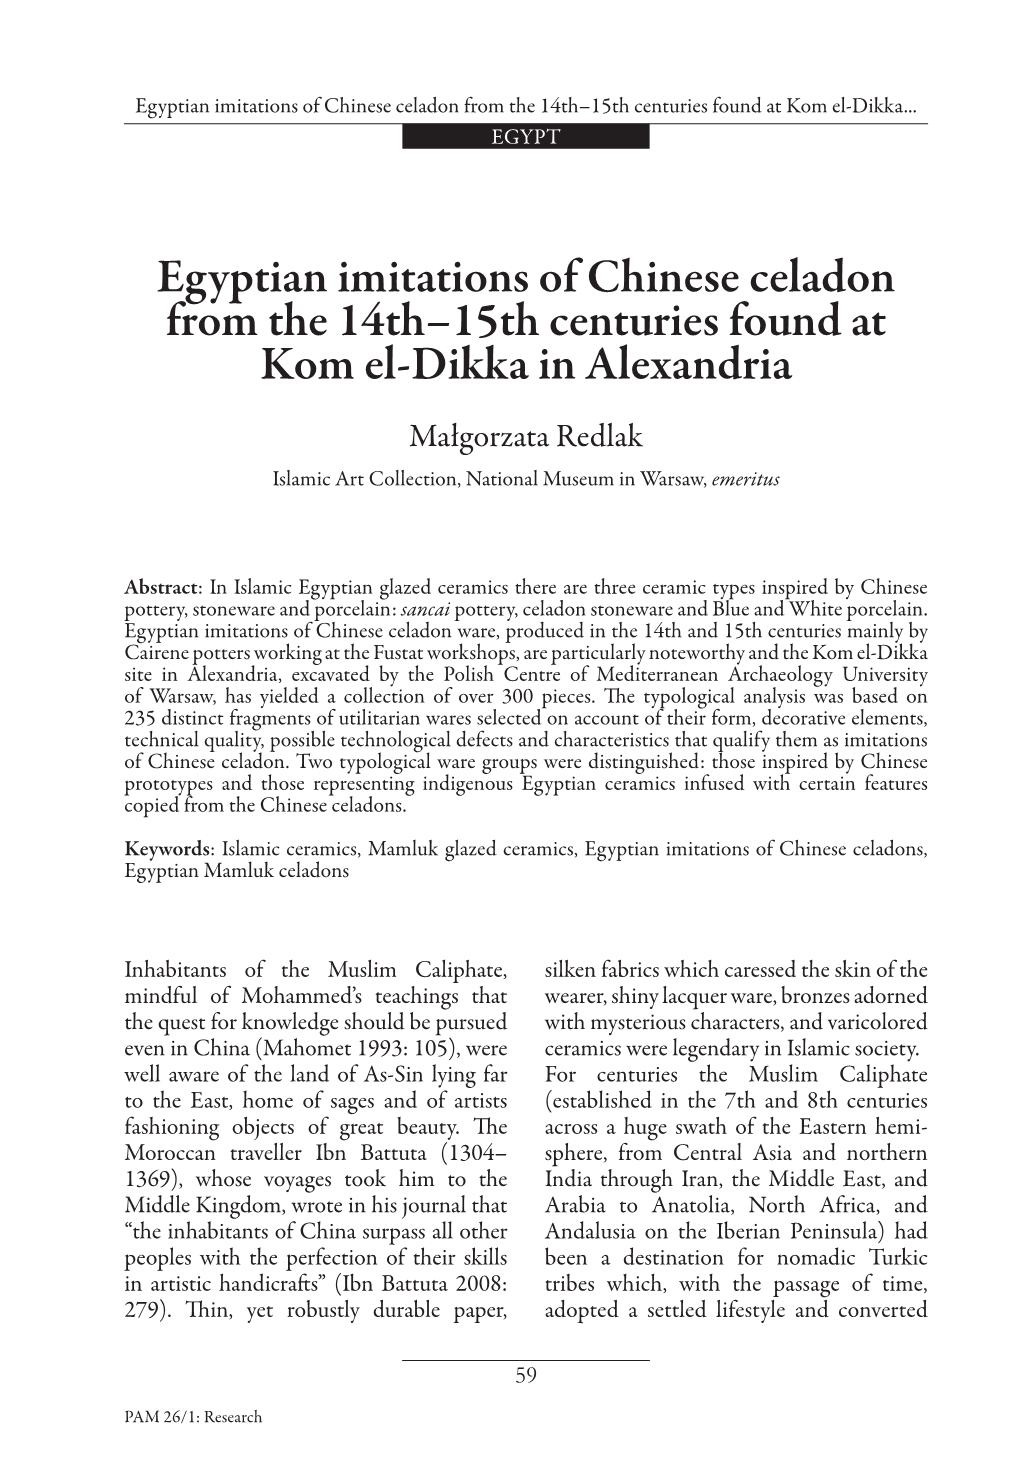 Egyptian Imitations of Chinese Celadon from the 14Th–15Th Centuries Found at Kom El-Dikka